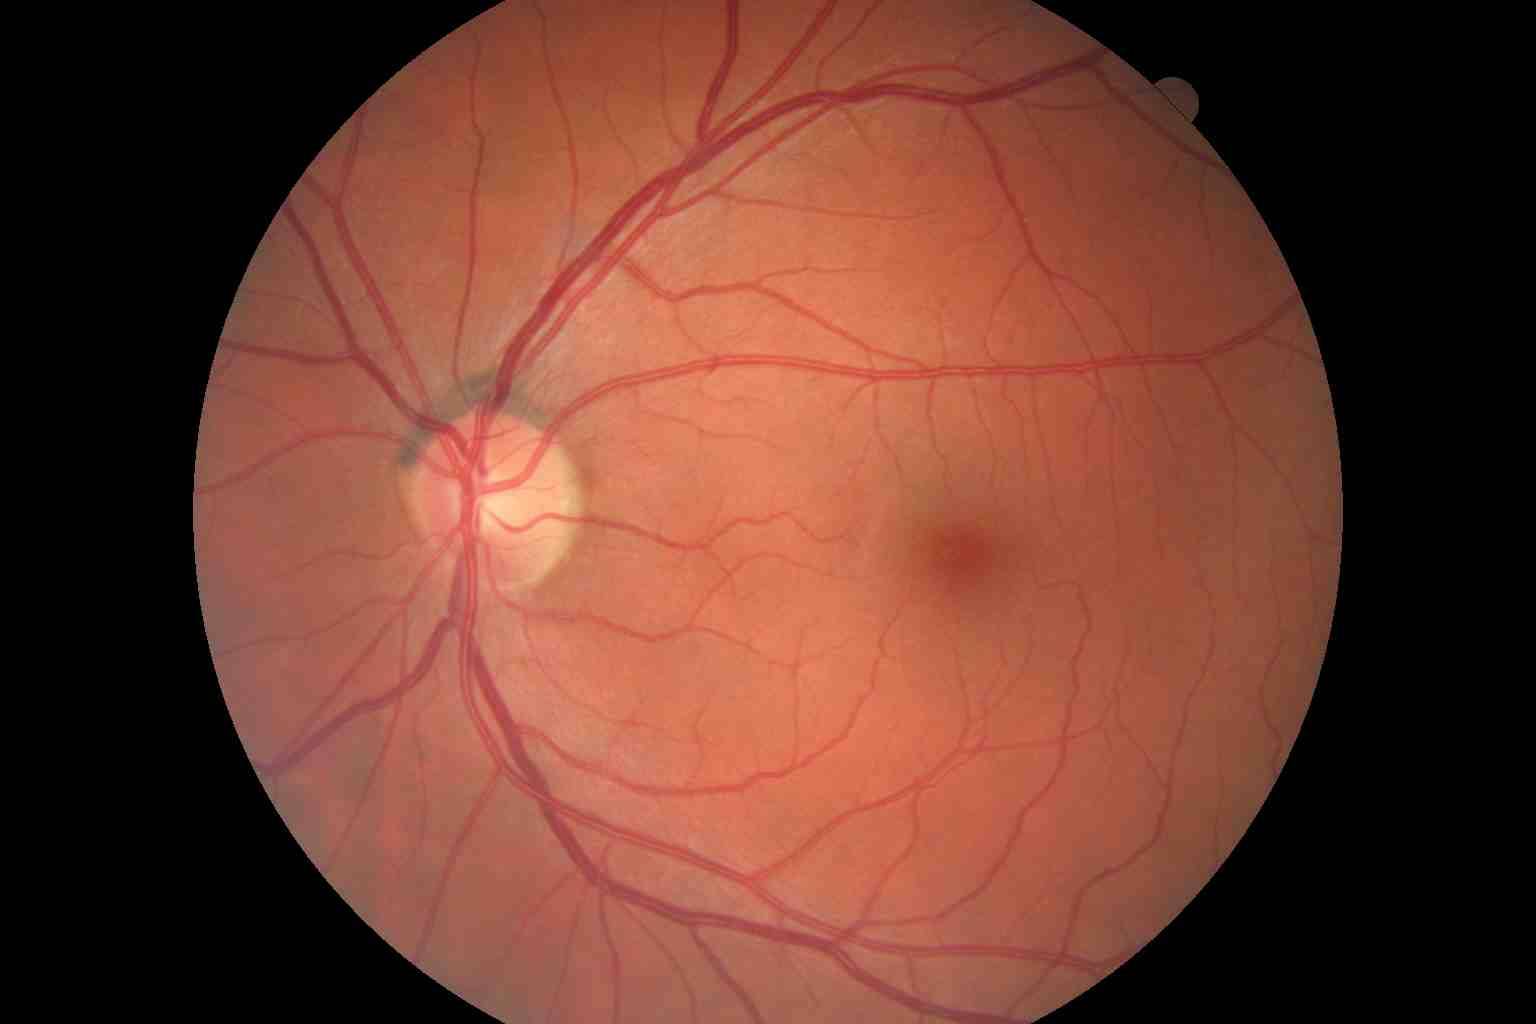 Examples of retinal photos from our fayetteville office